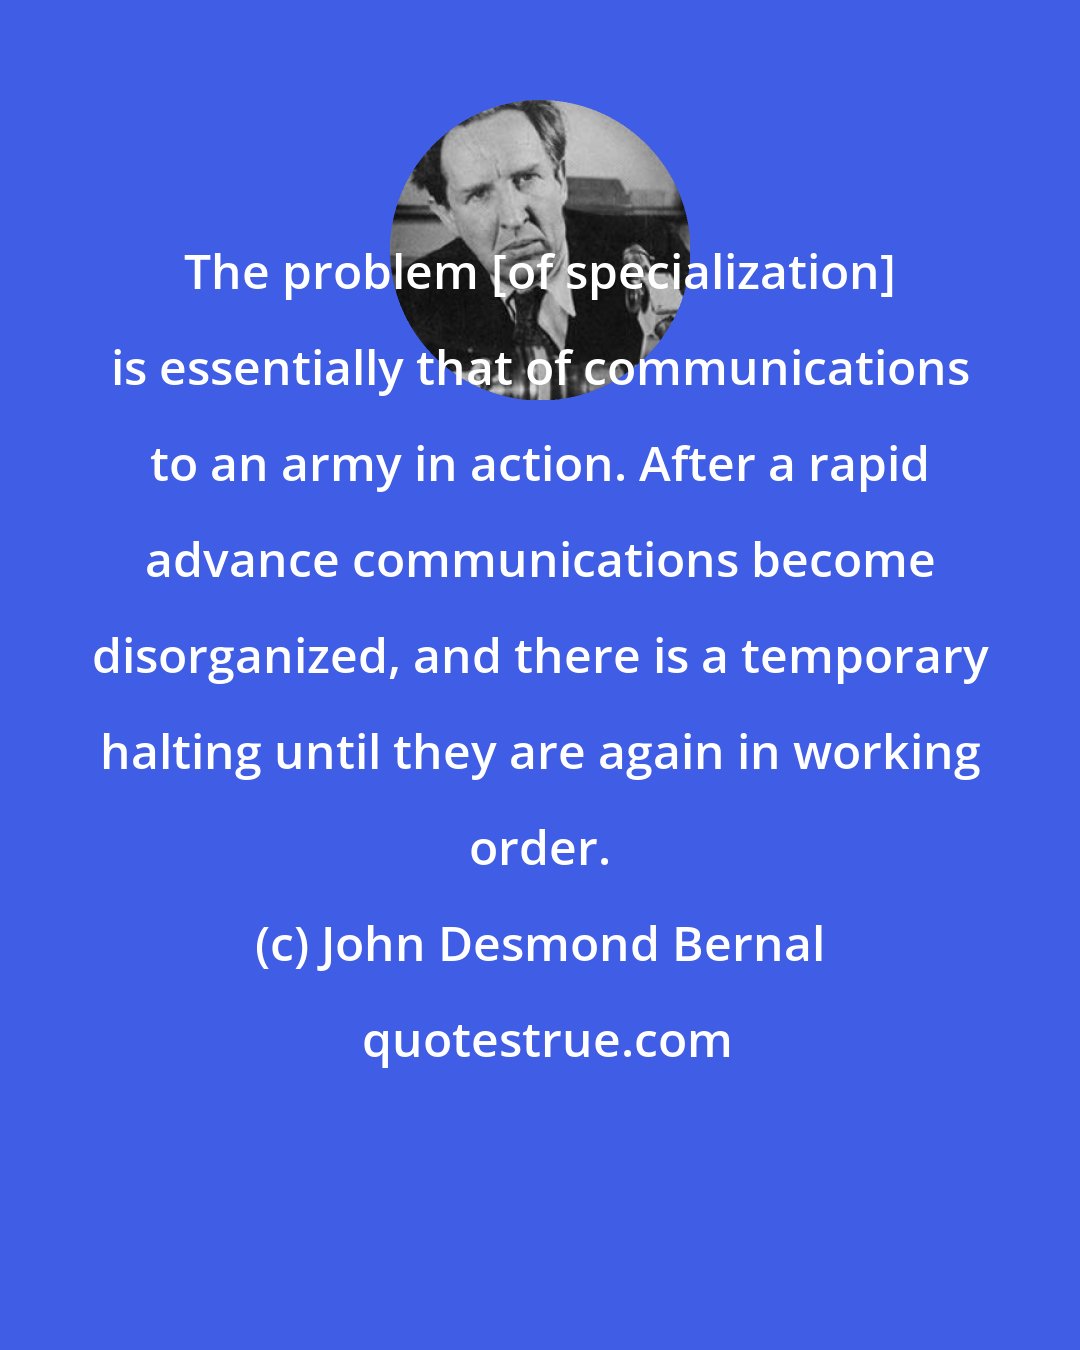 John Desmond Bernal: The problem [of specialization] is essentially that of communications to an army in action. After a rapid advance communications become disorganized, and there is a temporary halting until they are again in working order.